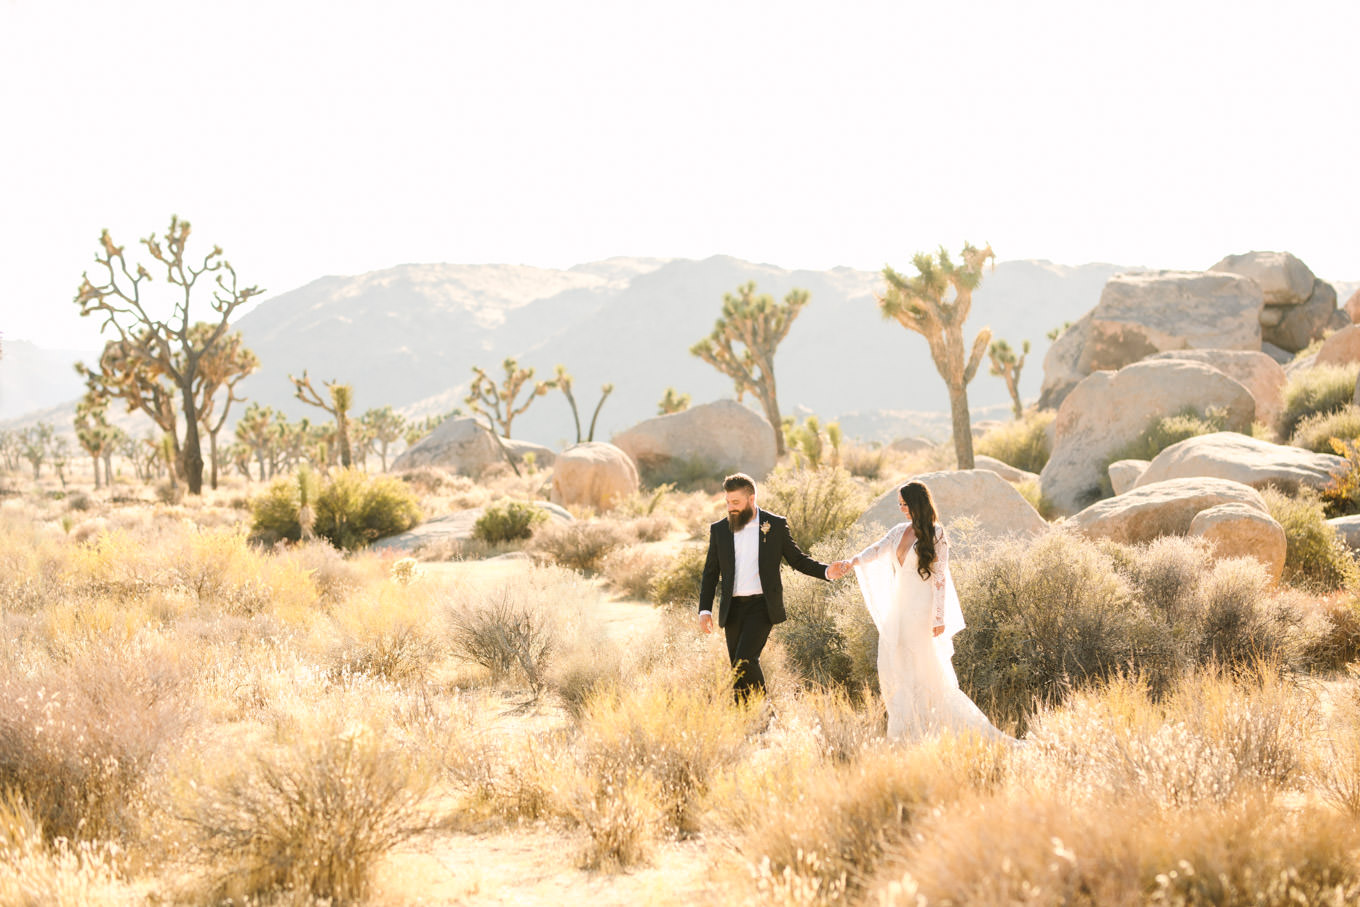 Bride and groom elopement in Joshua Tree National Park | Engagement, elopement, and wedding photography roundup of Mary Costa’s favorite images from 2020 | Colorful and elevated photography for fun-loving couples in Southern California | #2020wedding #elopement #weddingphoto #weddingphotography #microwedding   Source: Mary Costa Photography | Los Angeles